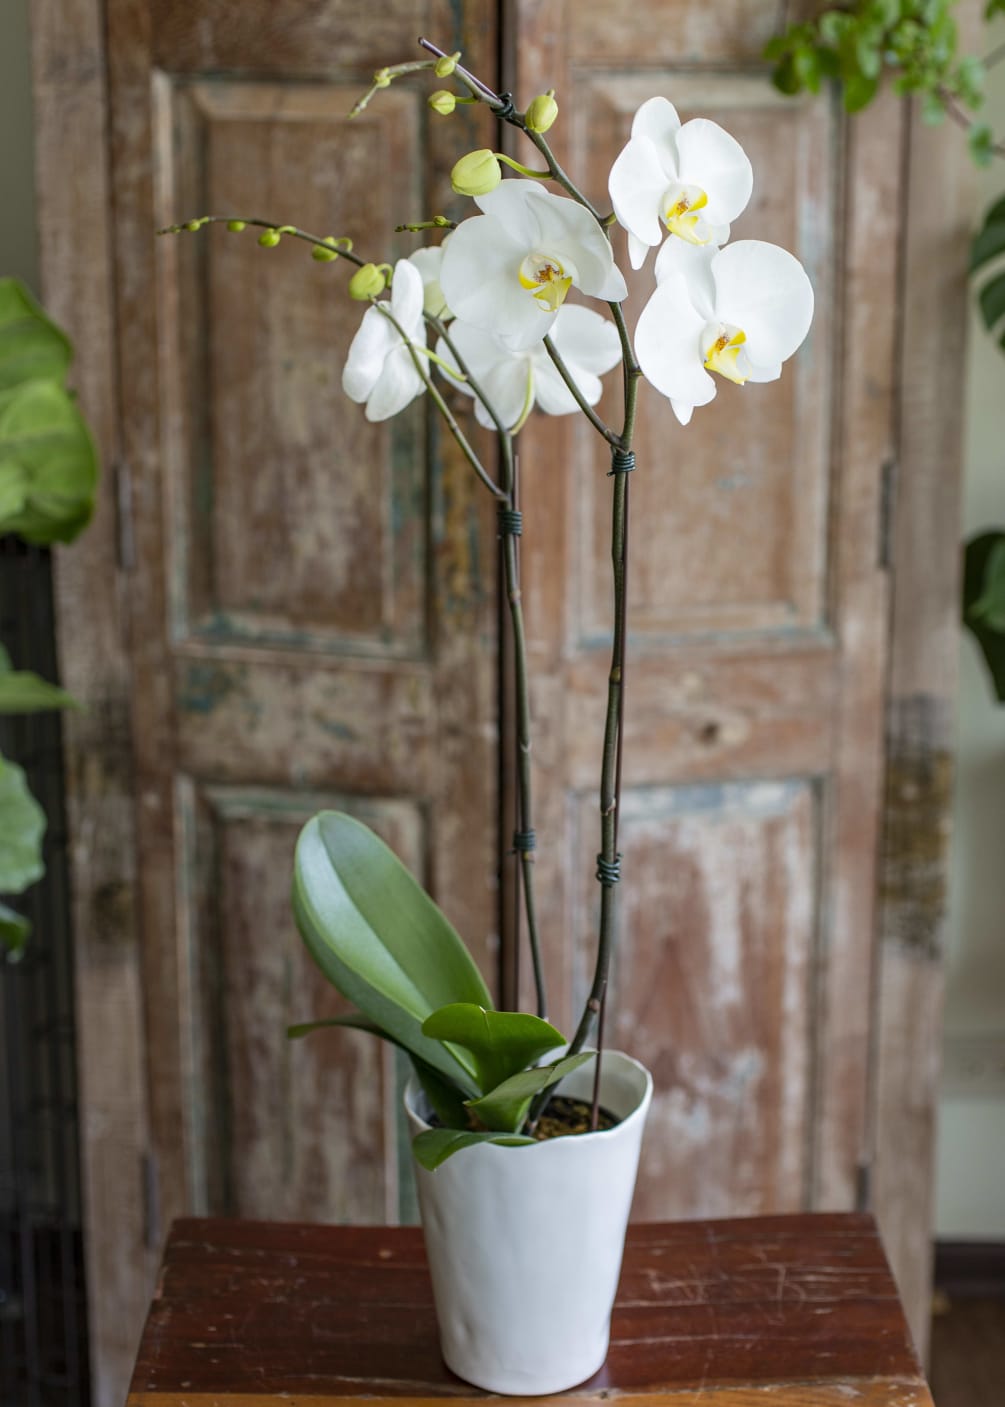 White Phalaenopsis Orchid in a ceramic pot.

